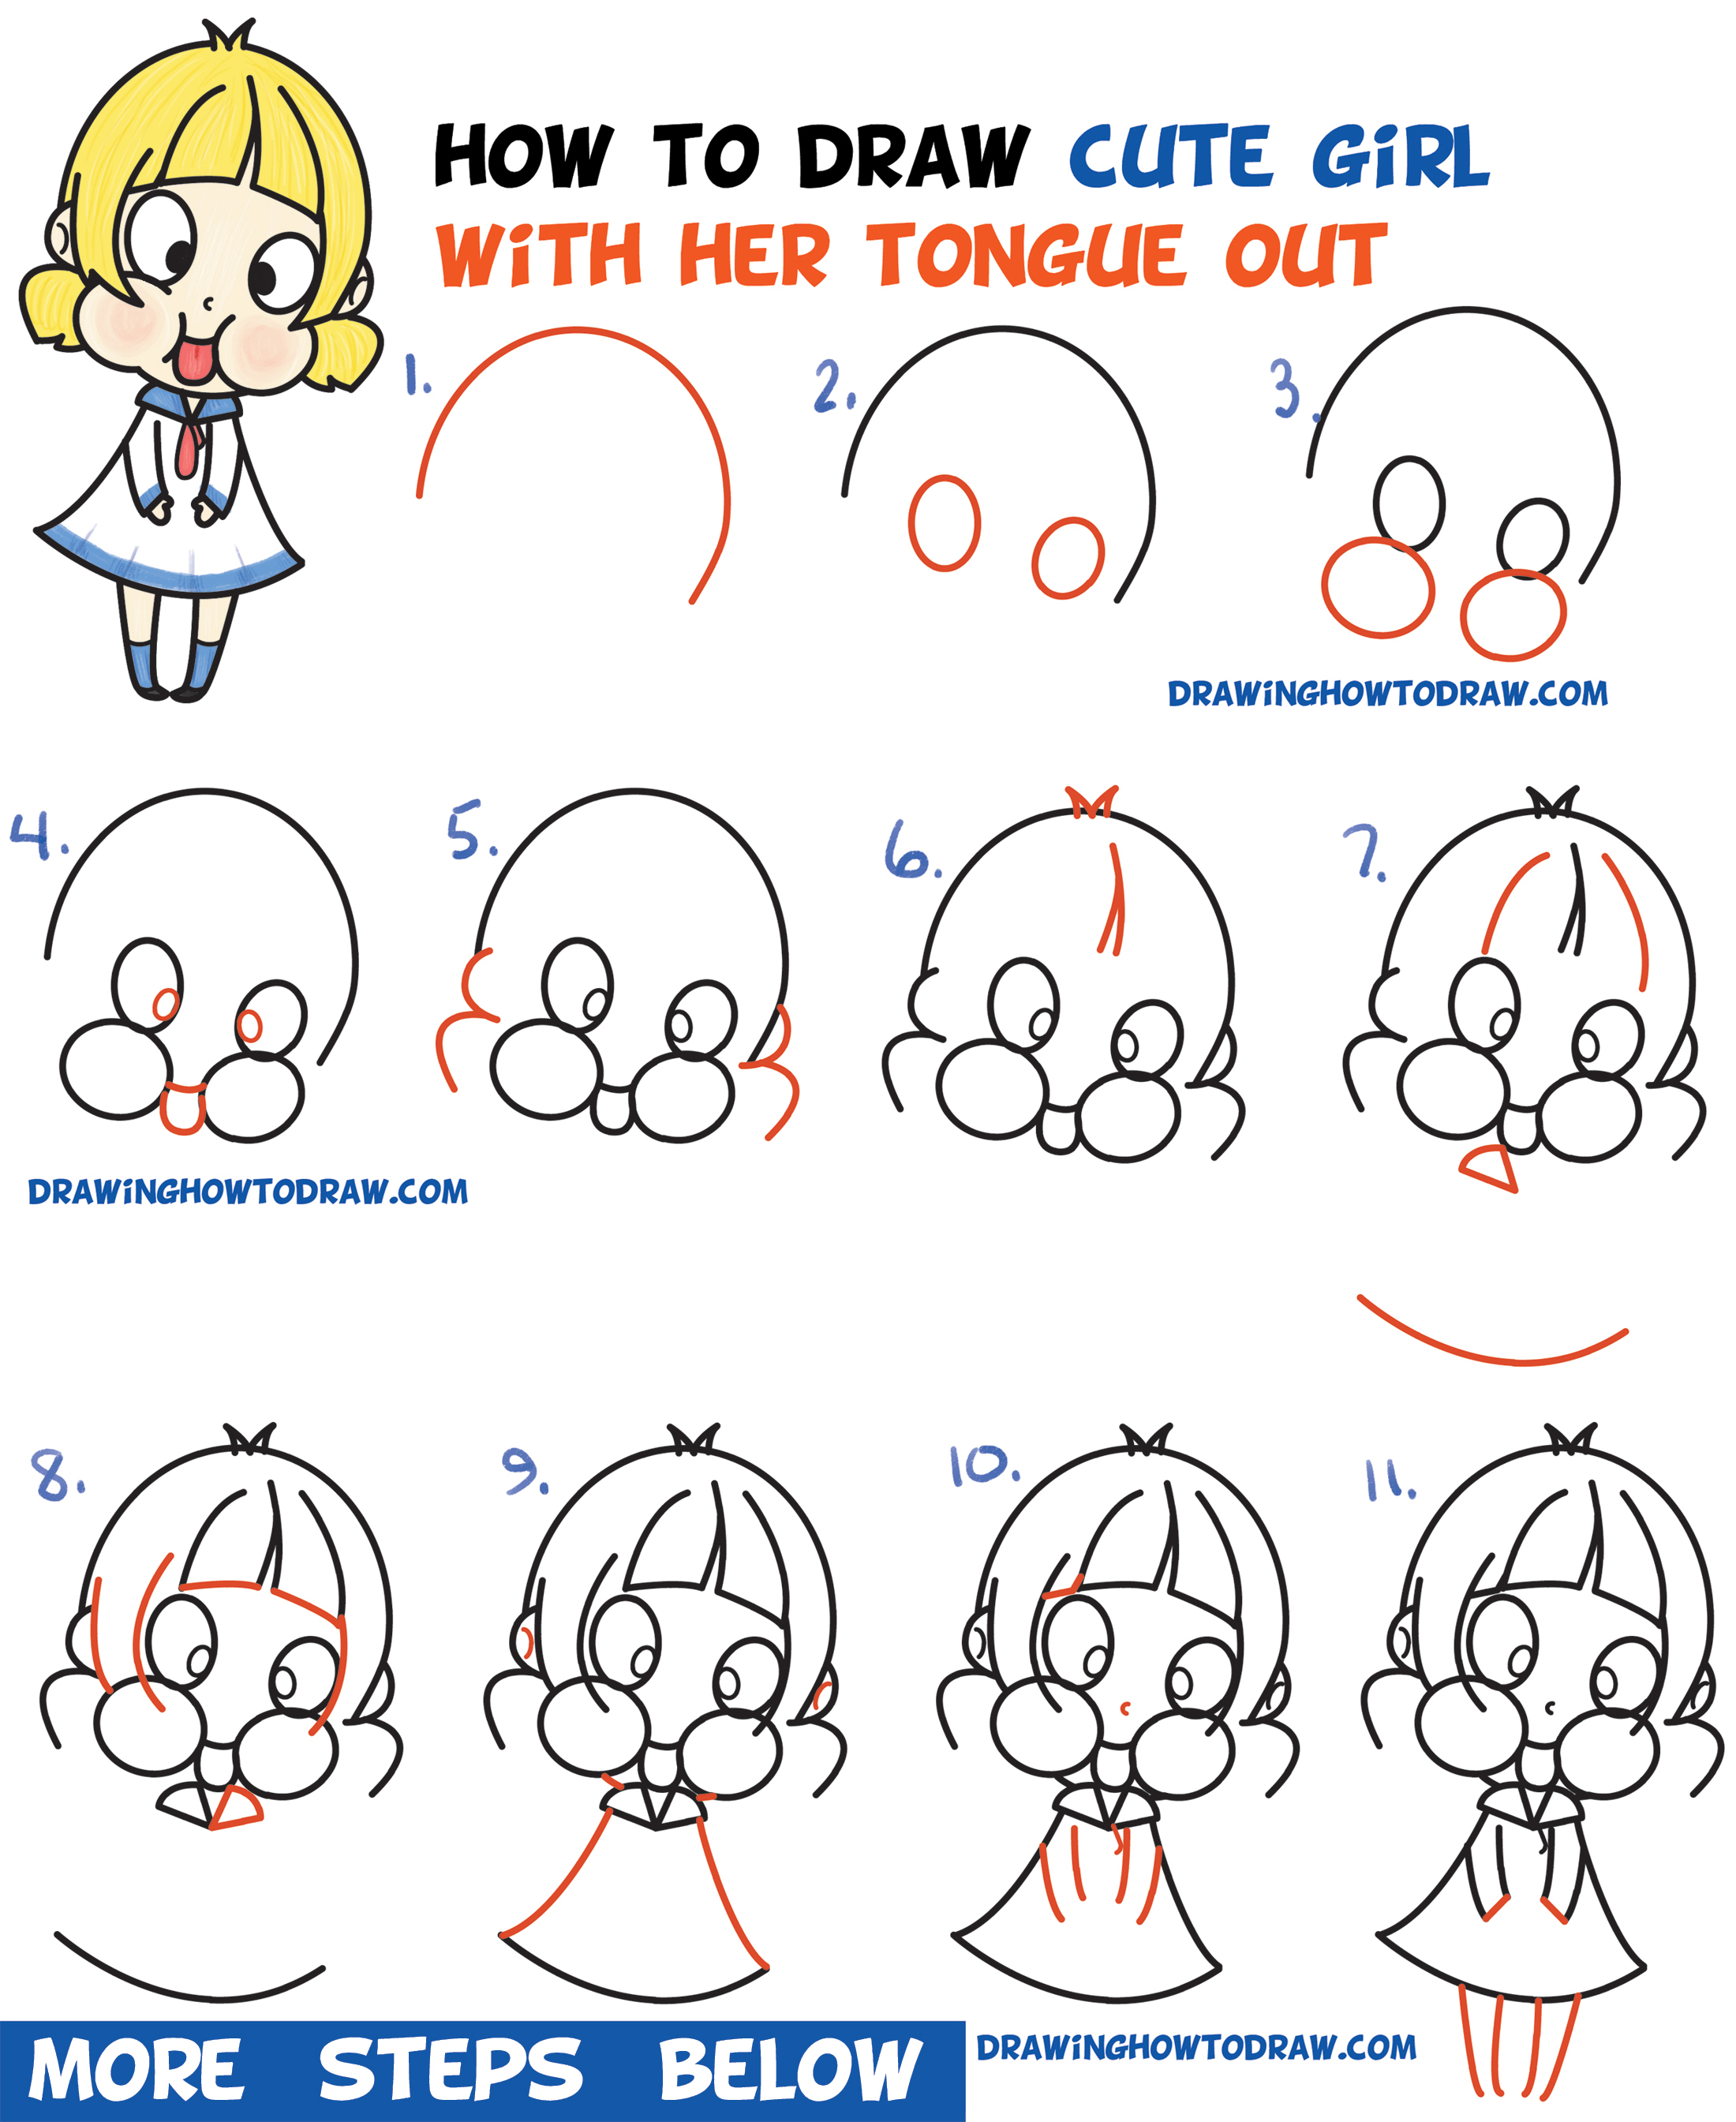 How to Draw a Cute Cartoon Girl (Chibi) Sticking Her Tongue Out Easy